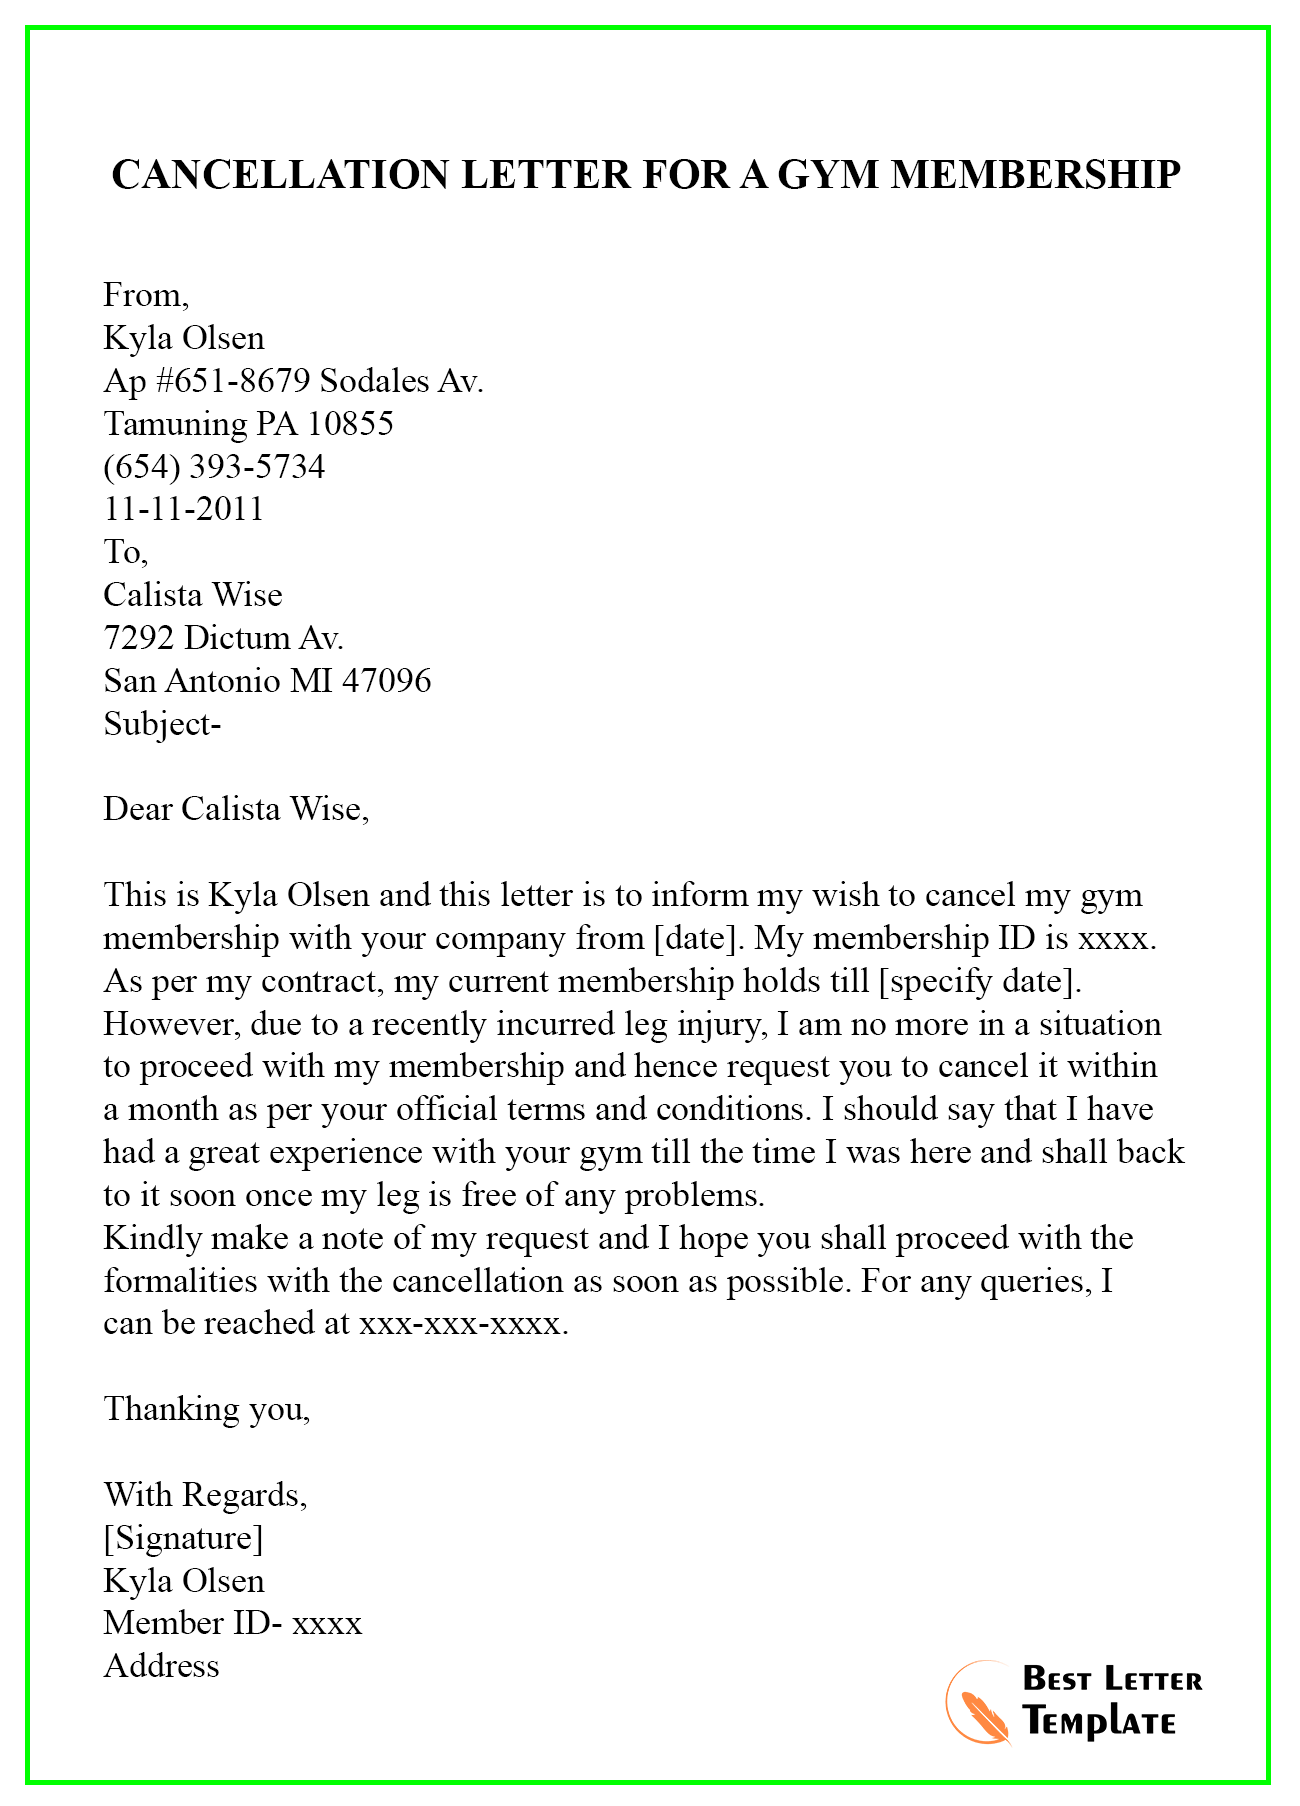 CANCELLATION LETTER FOR A GYM MEMBERSHIP Best Letter Template